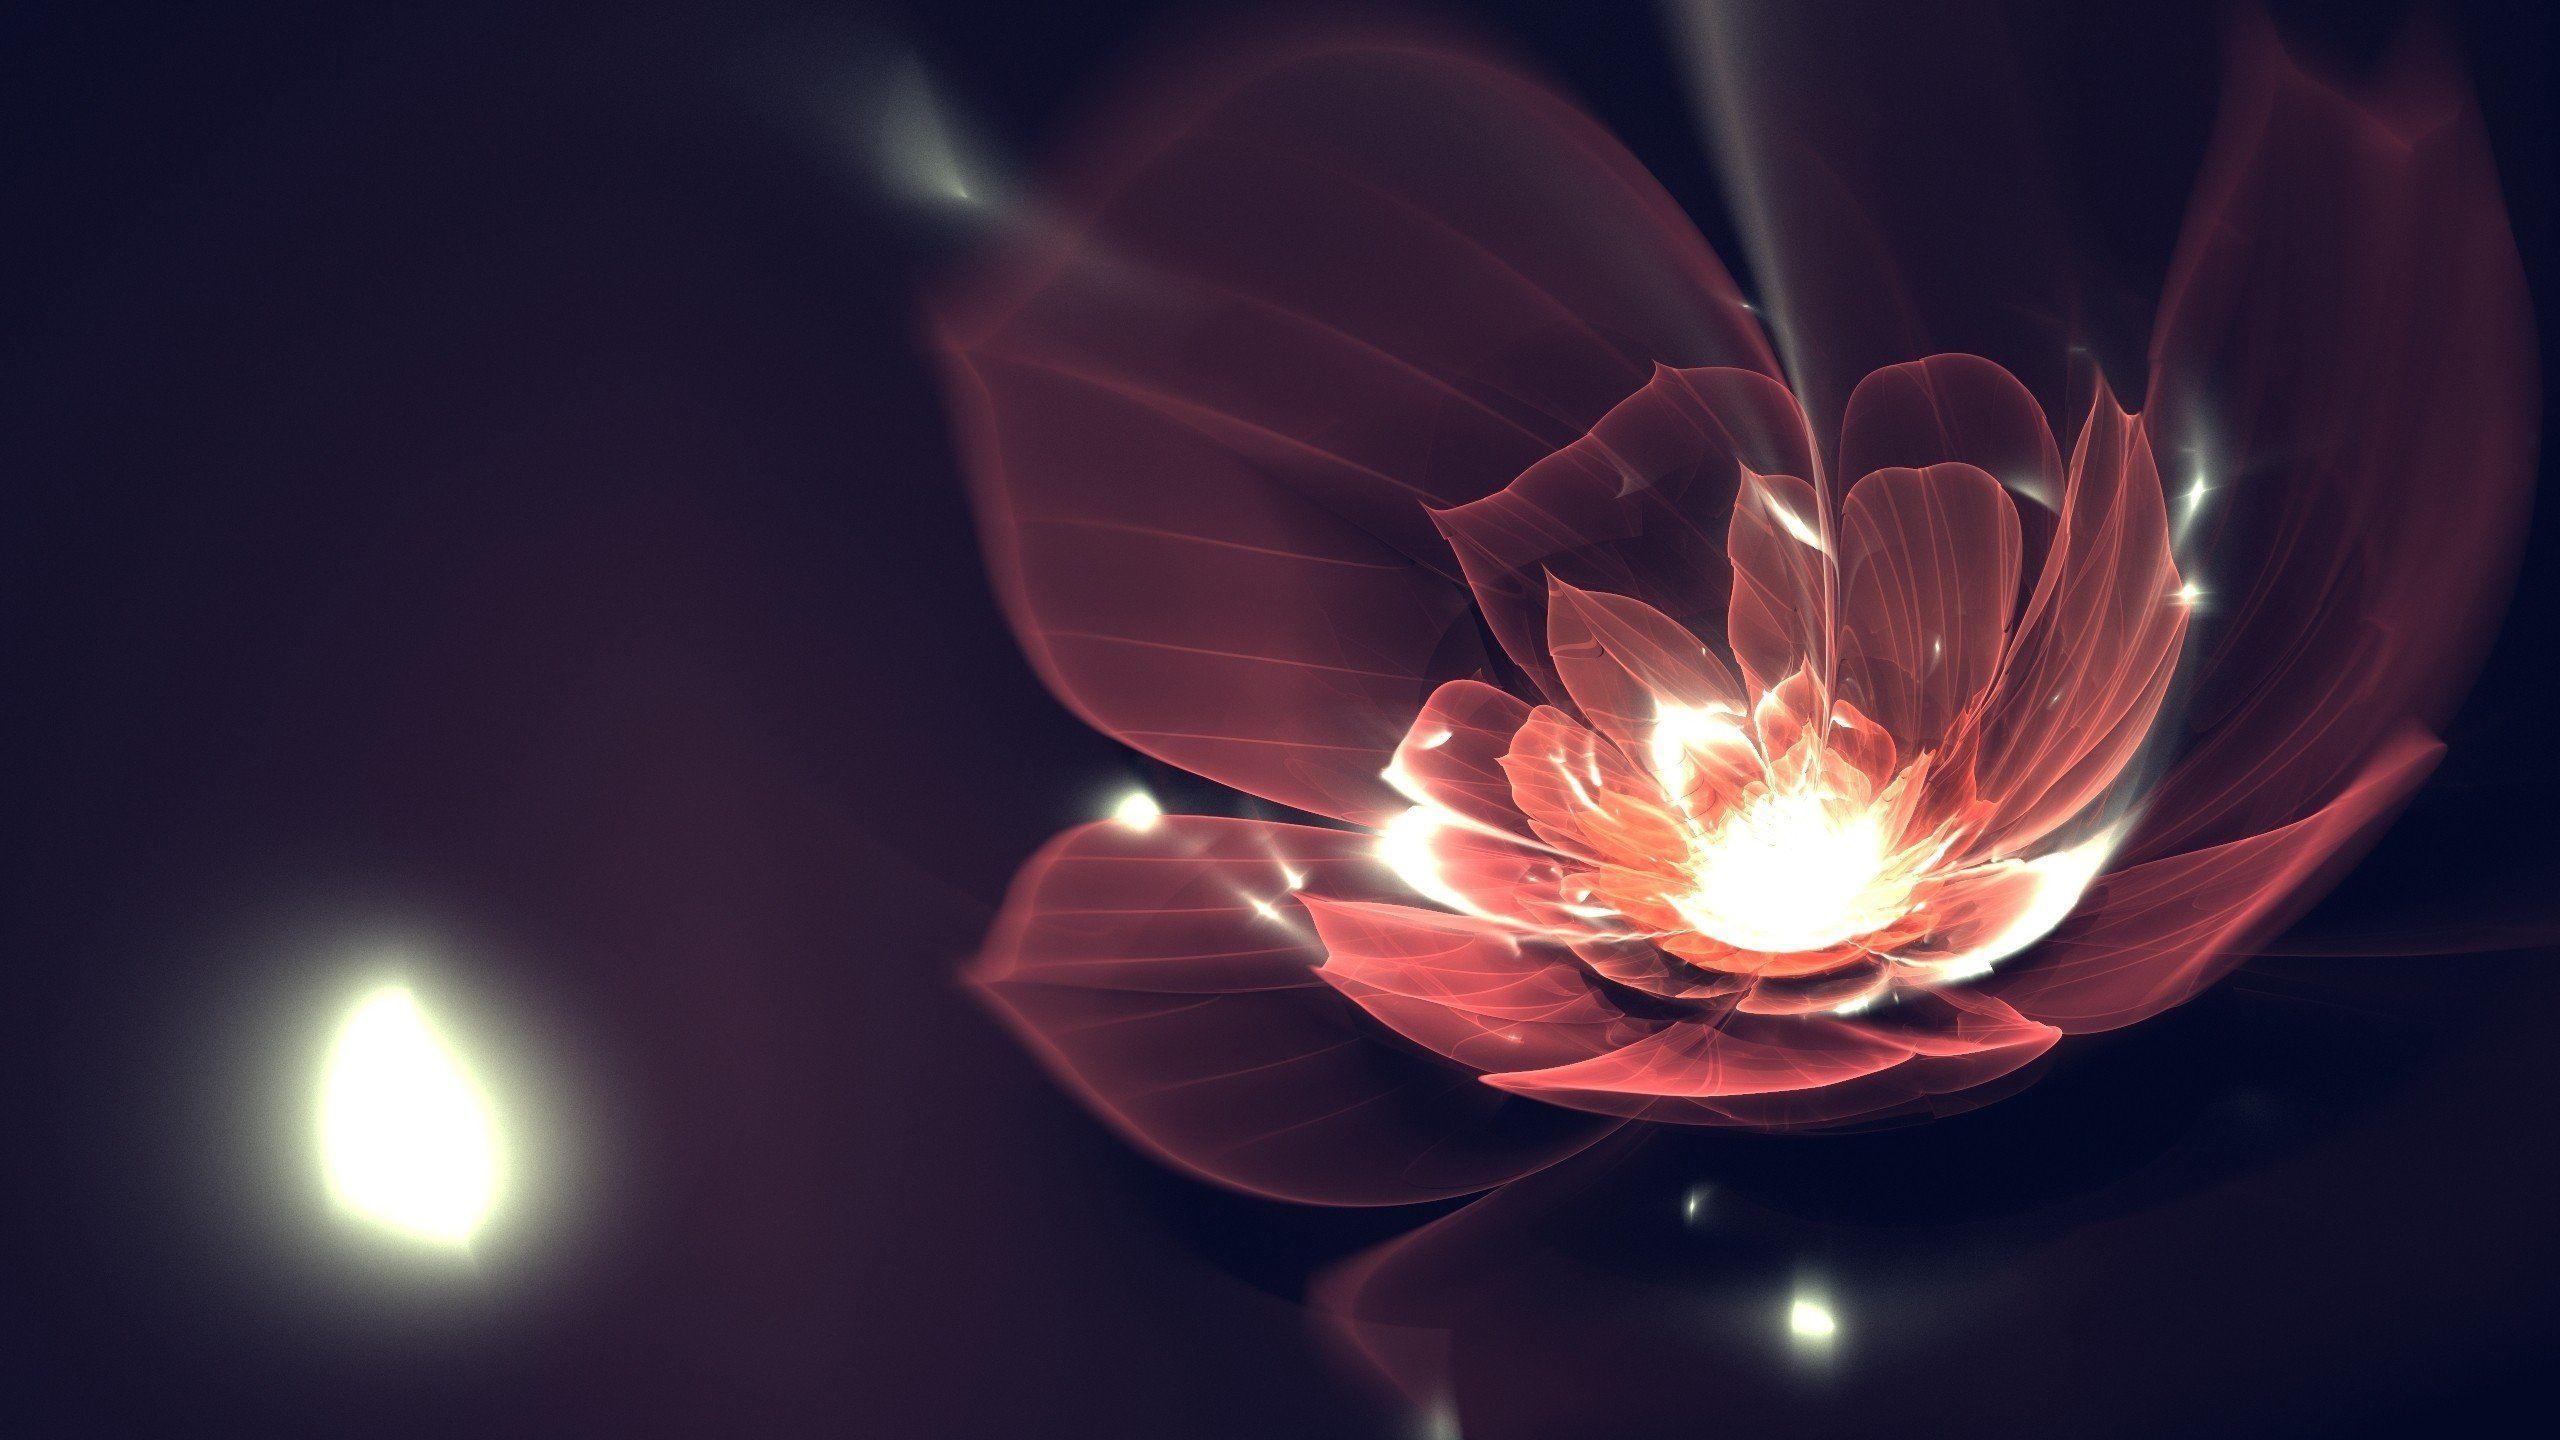 Abstract dark flowers particles wallpaperx1440